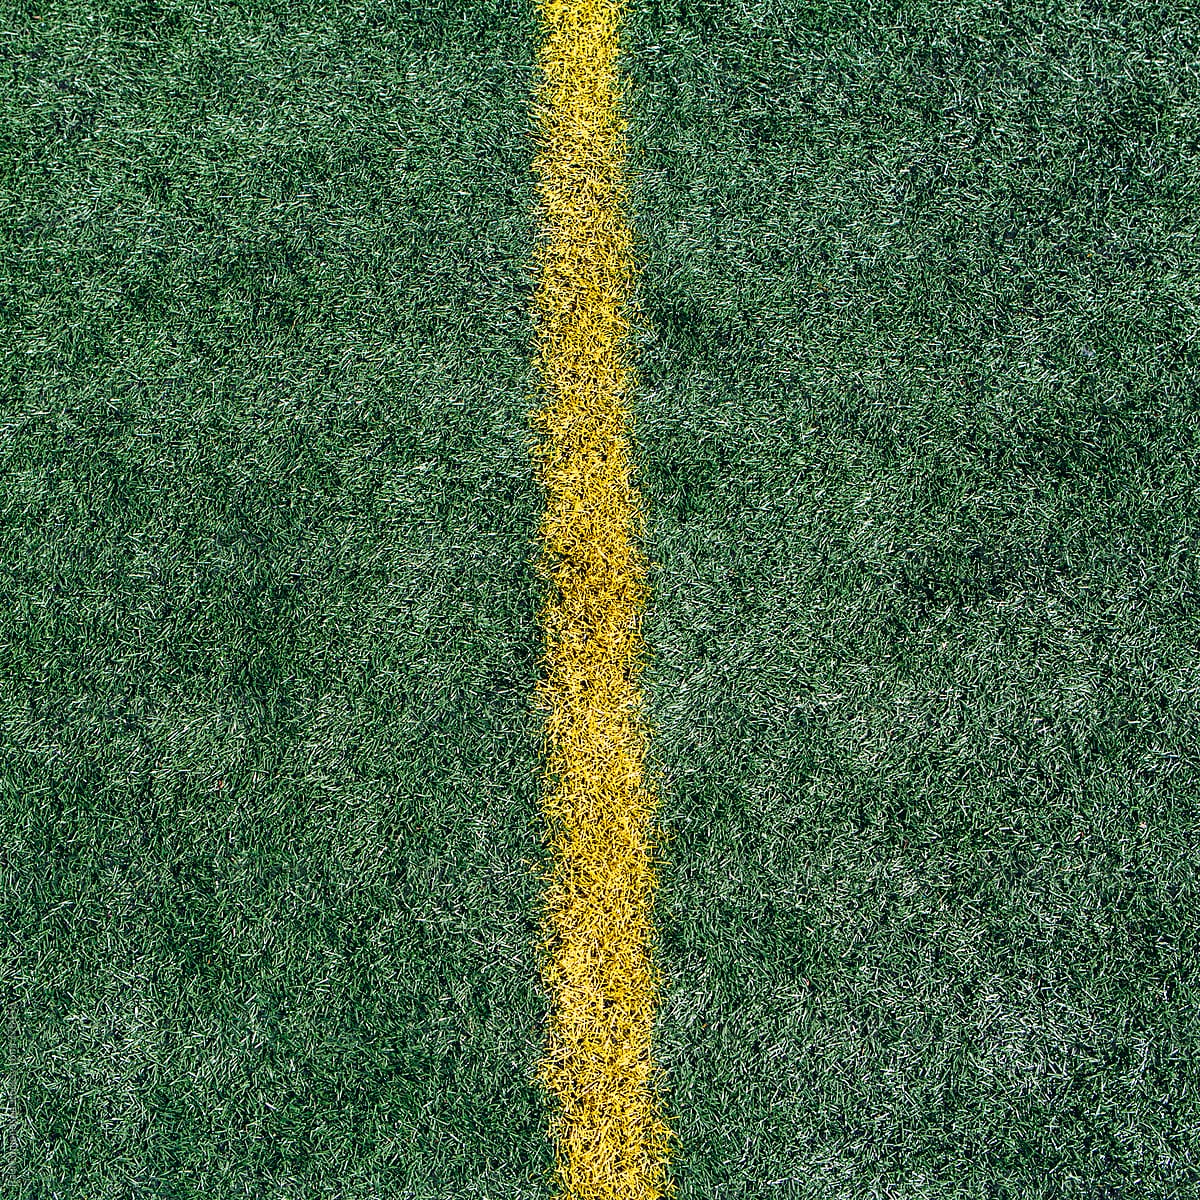 Yellow boundary line on artificial turf sports field